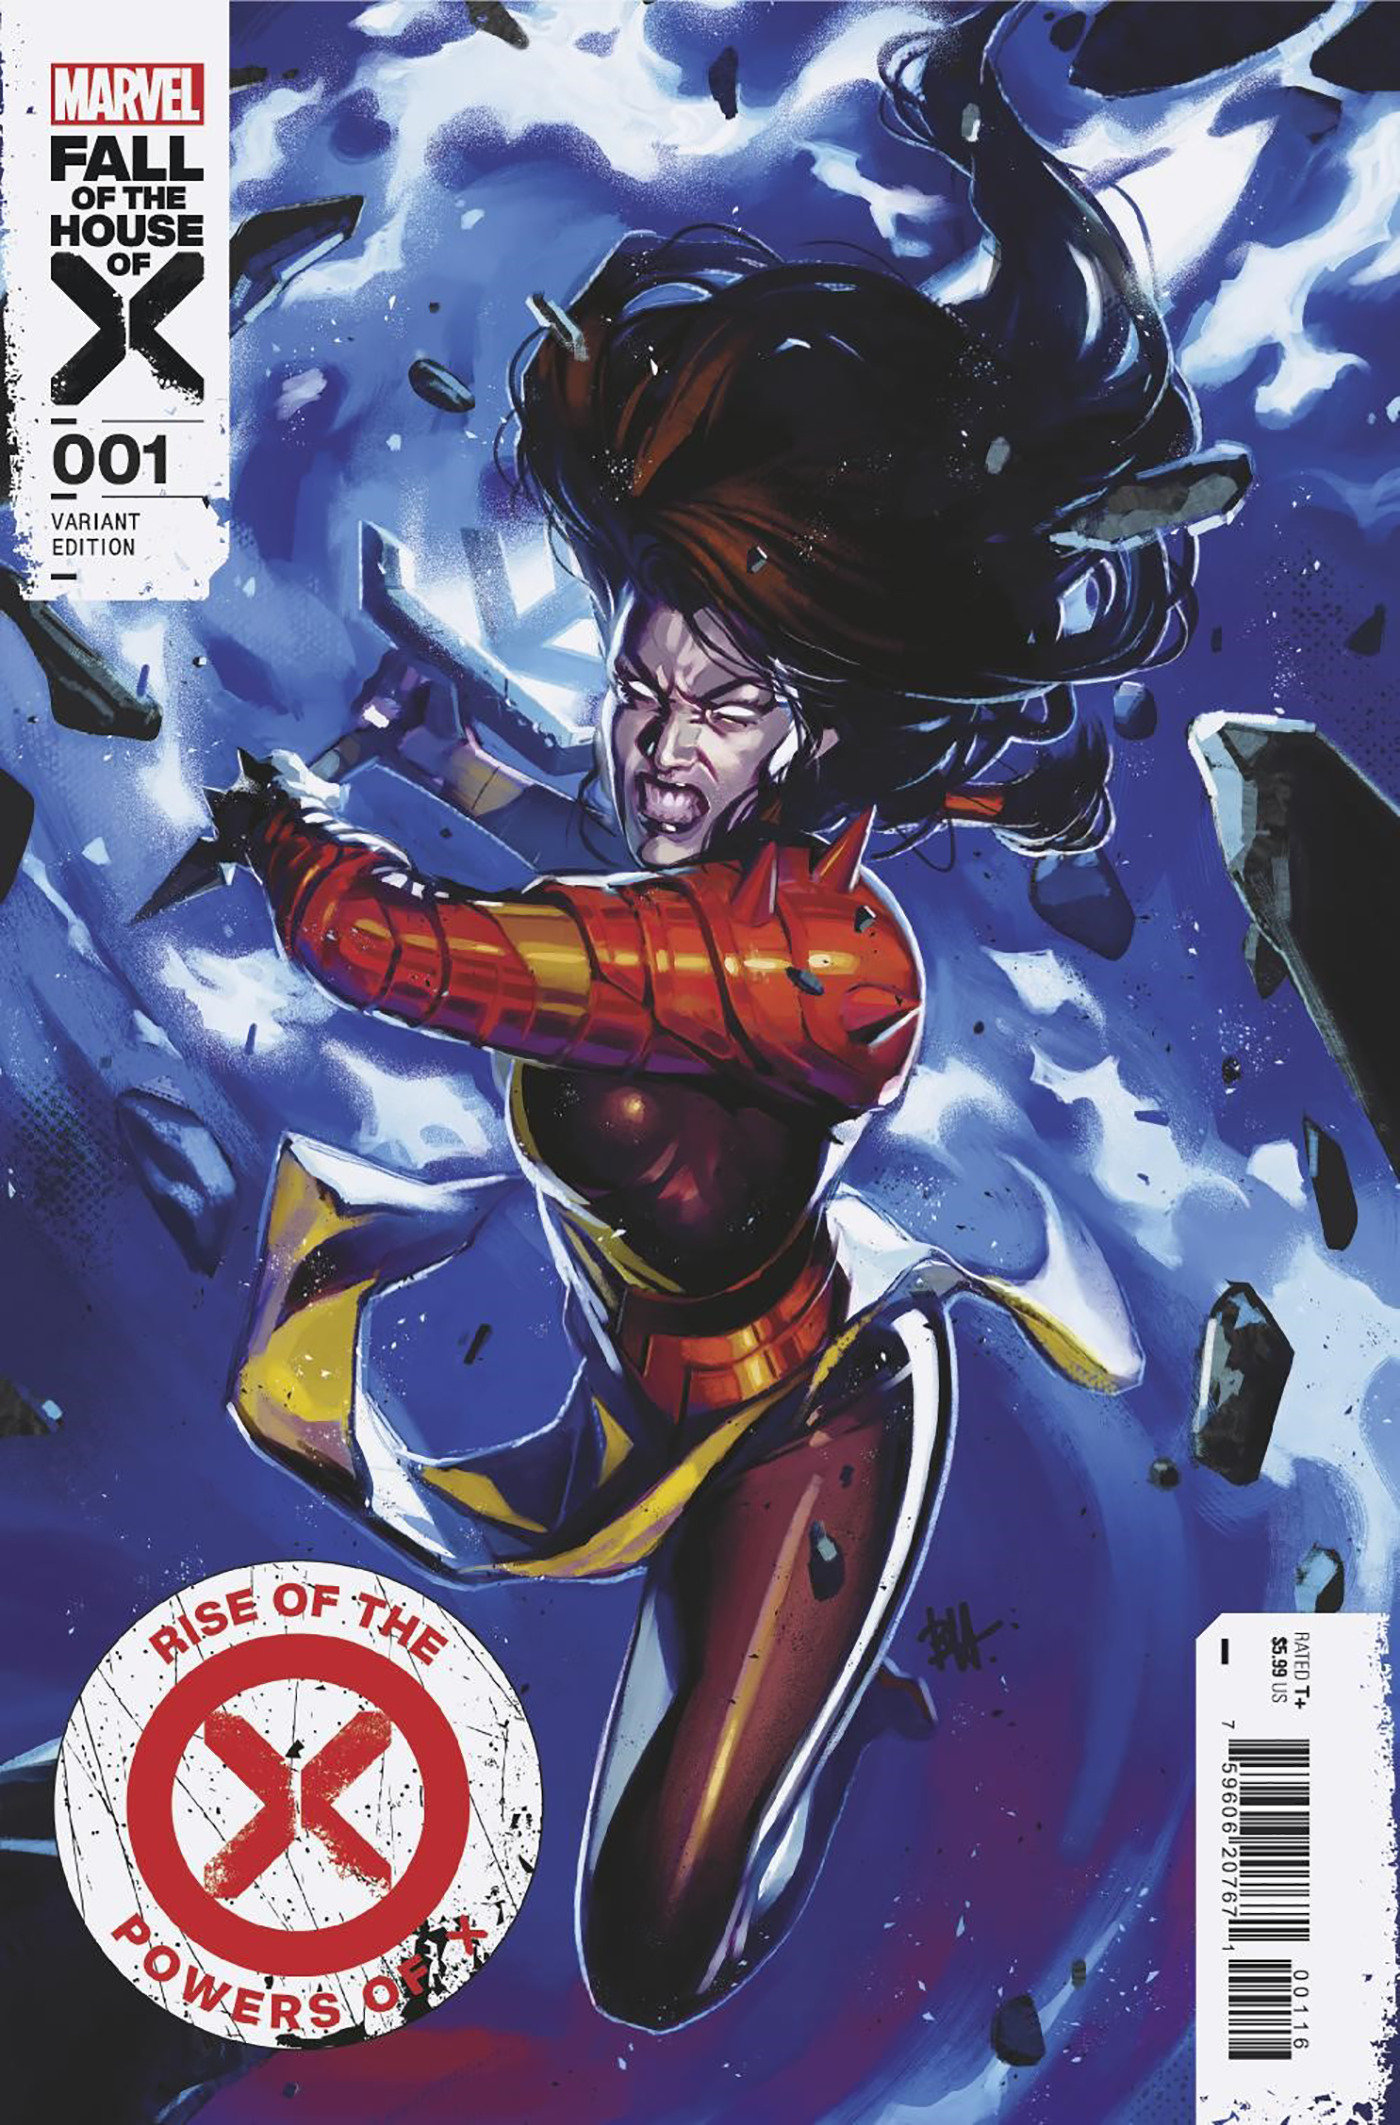 Rise of the Powers of X #1 1 for 25 Variant Ben Harvey